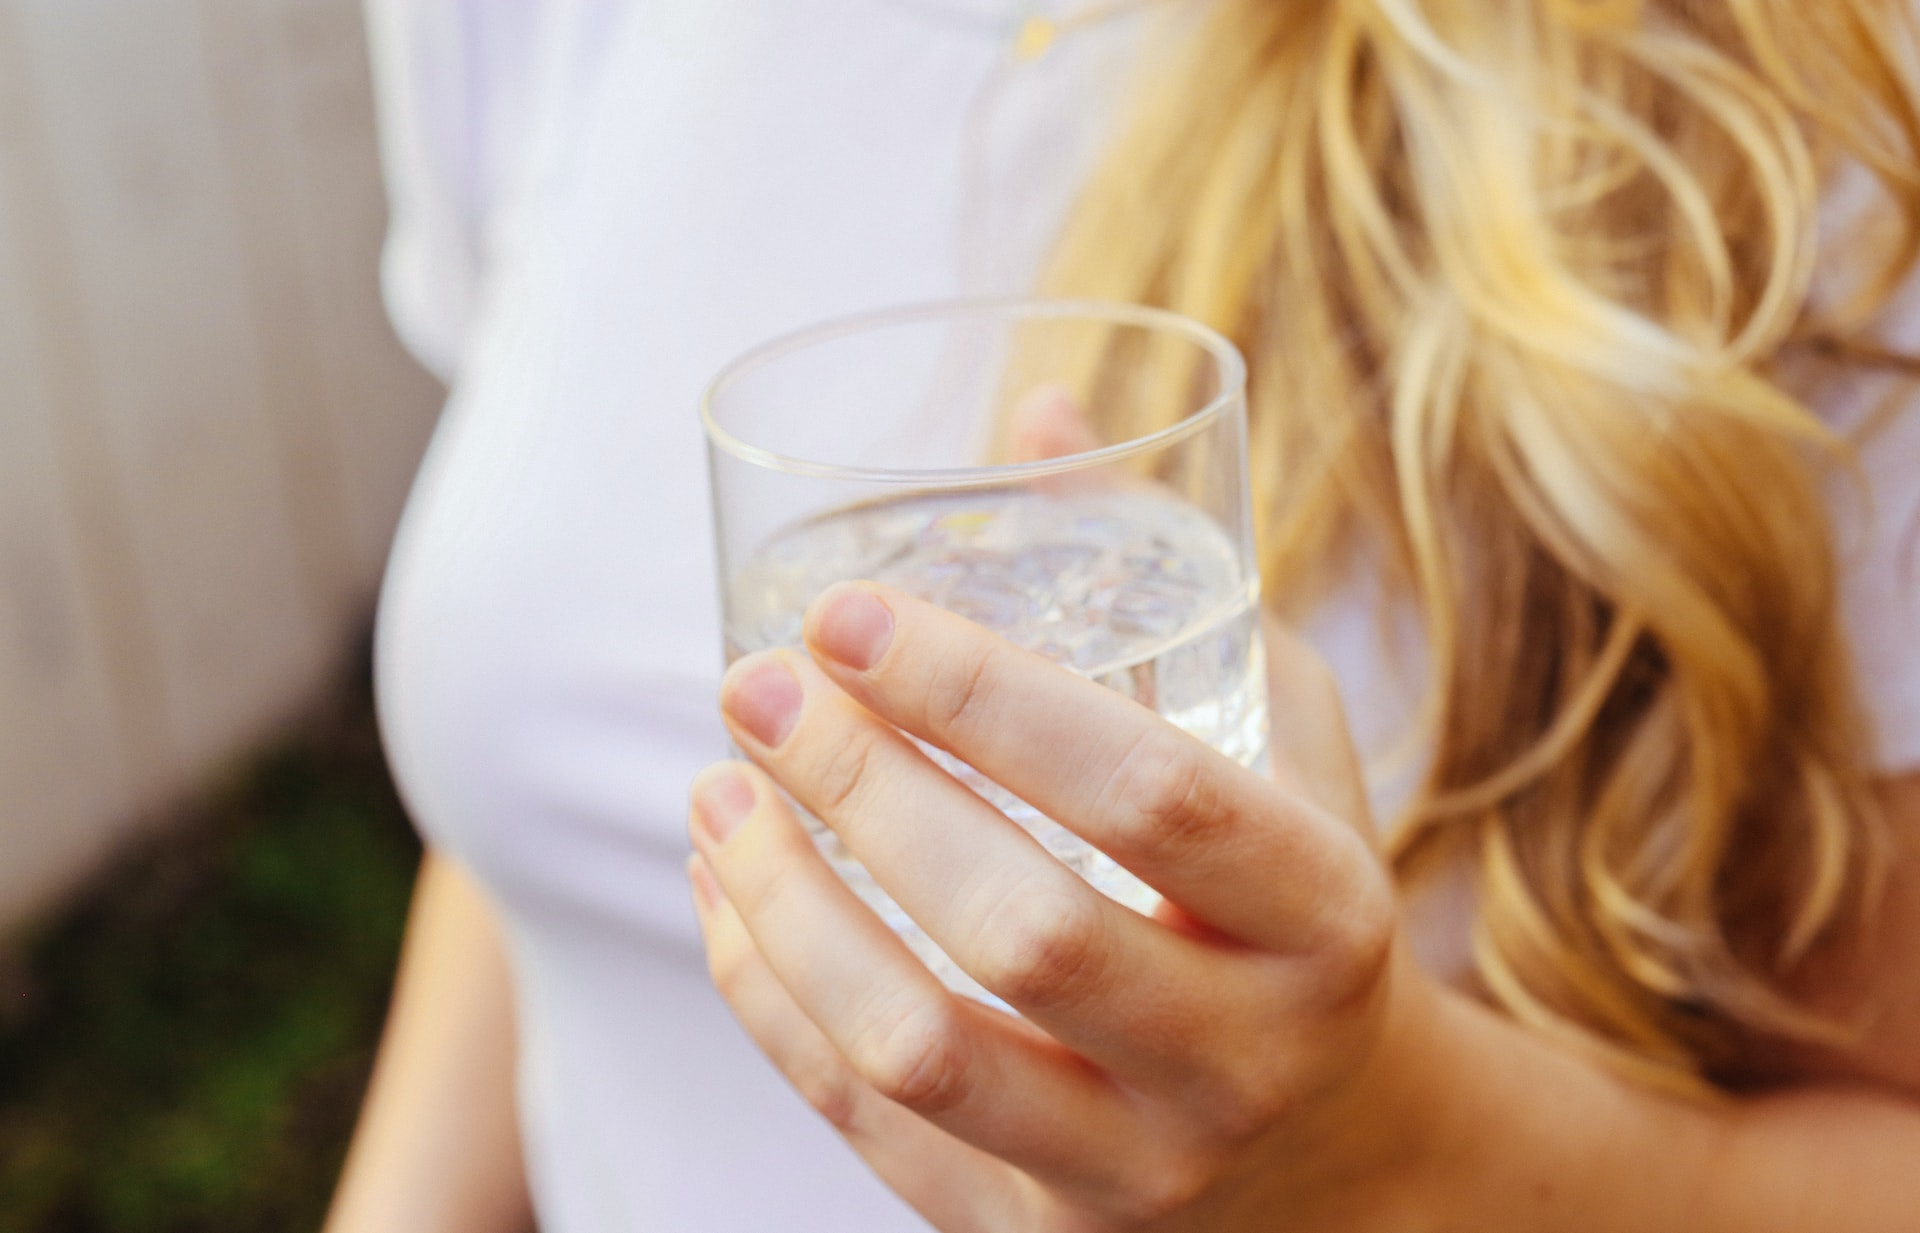 A woman holding a glass of water with freezer ice.